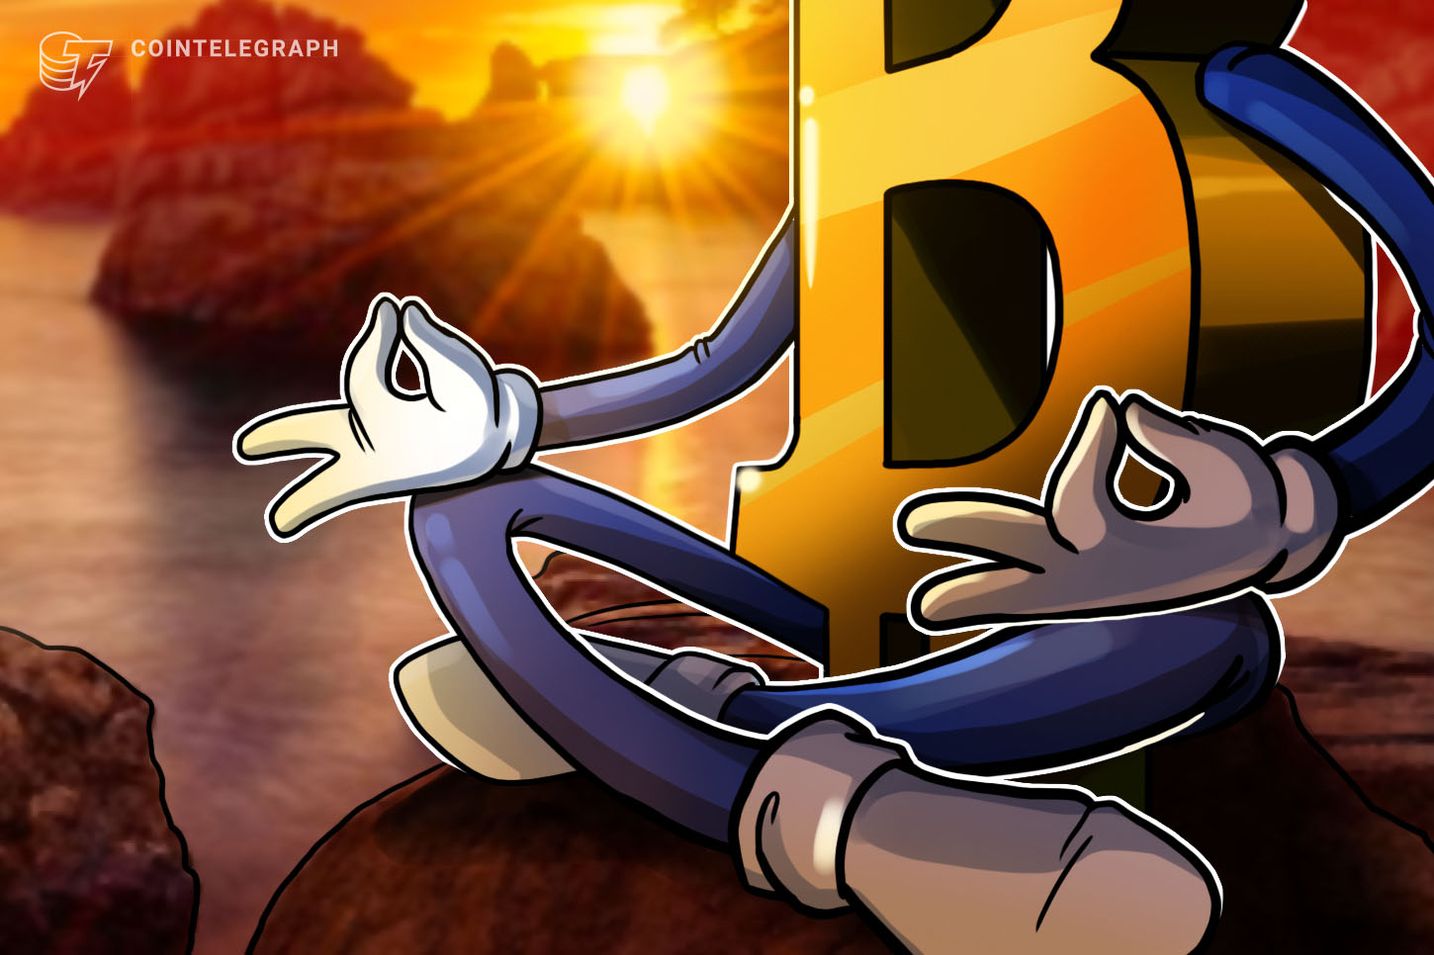 BTC price meets CPI as volatility ‘collapses’ — 5 things to know in Bitcoin this week